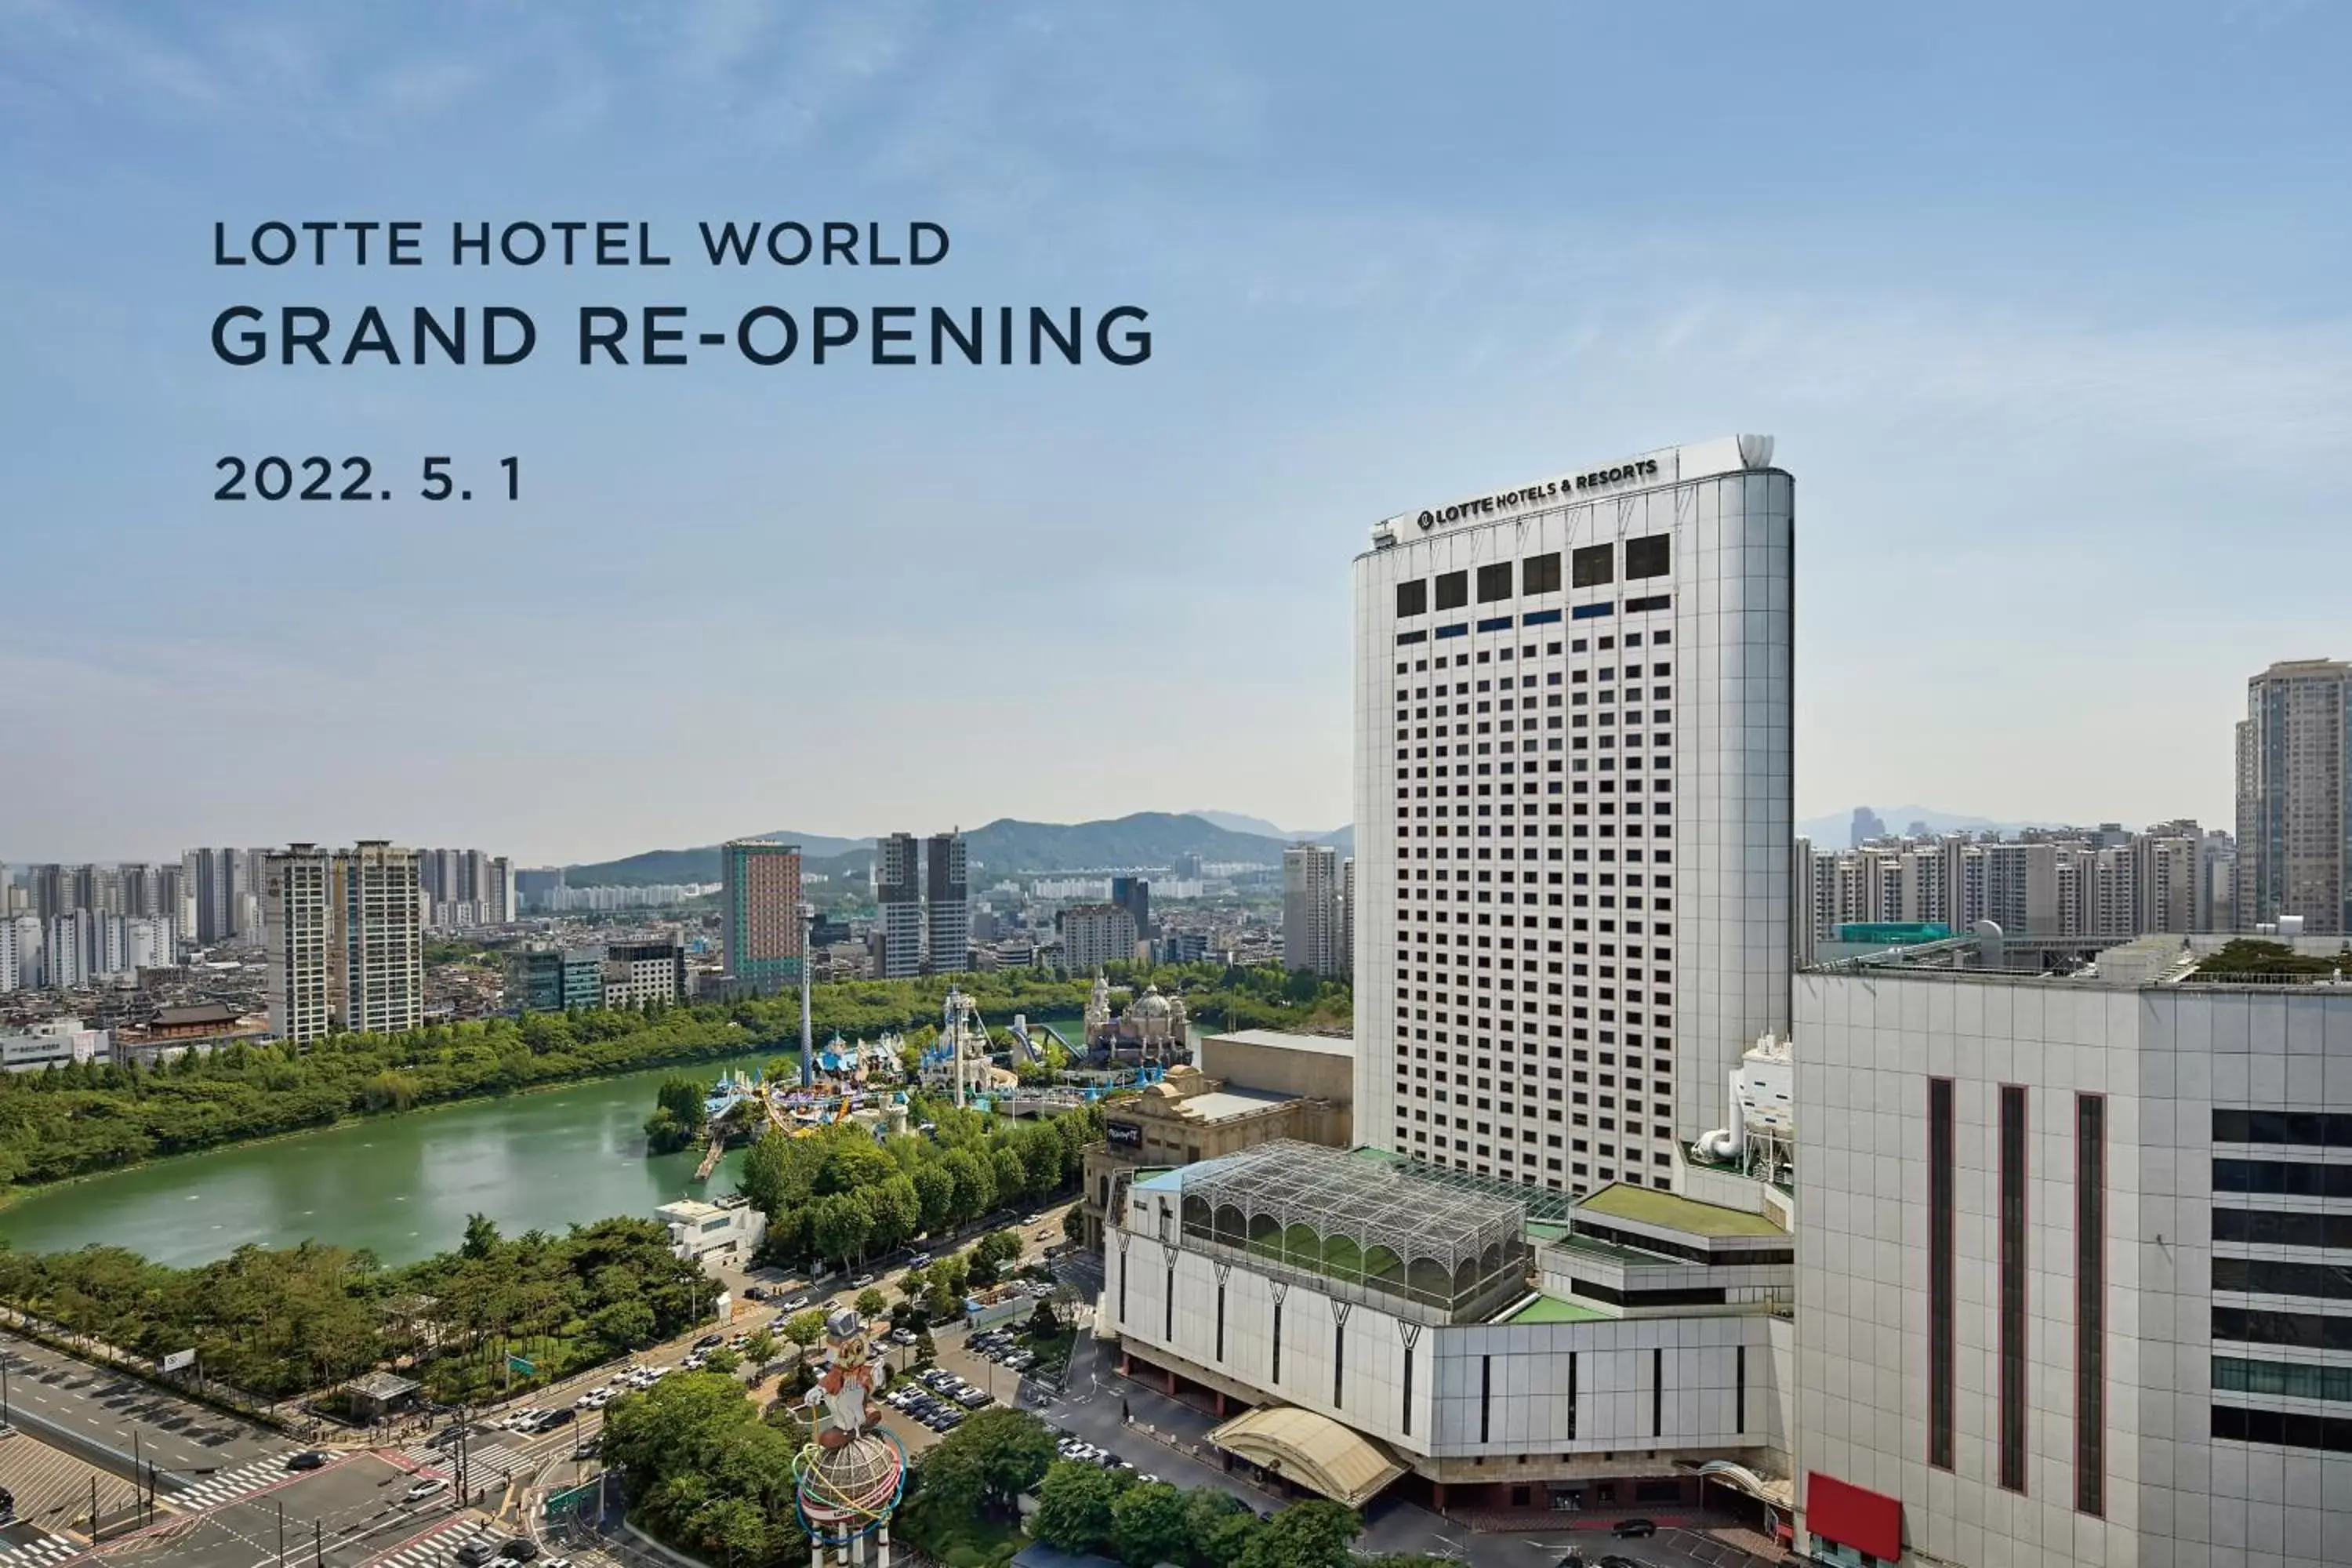 Property building in Lotte Hotel World